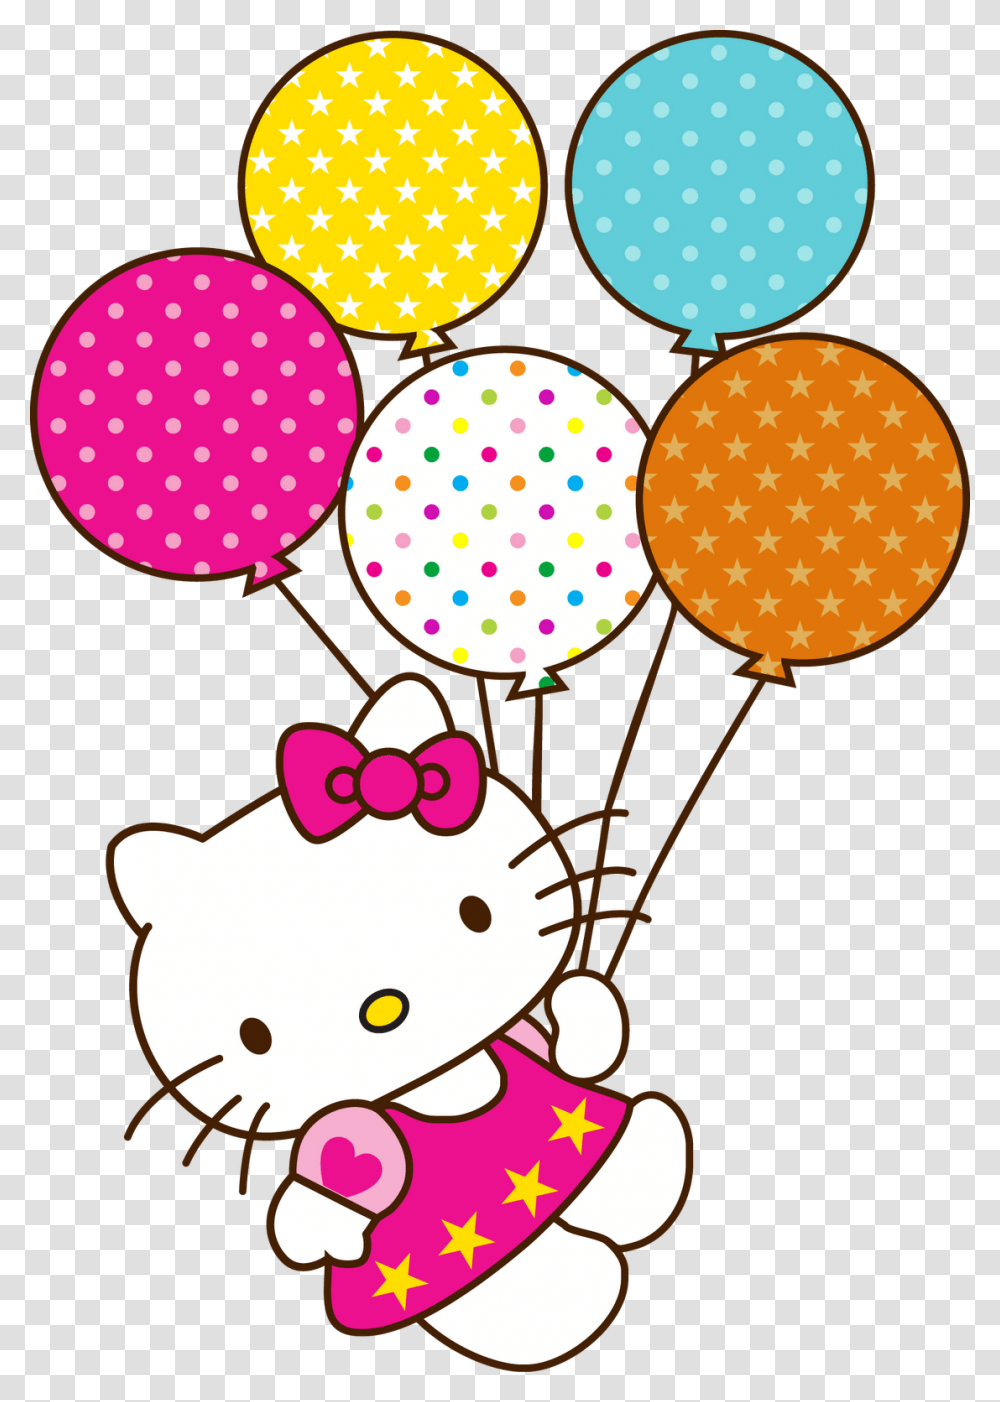 Free Hello Kitty Clipart Image Hello Kitty Background For Birthday, Ball, Balloon, Texture, Lamp Transparent Png